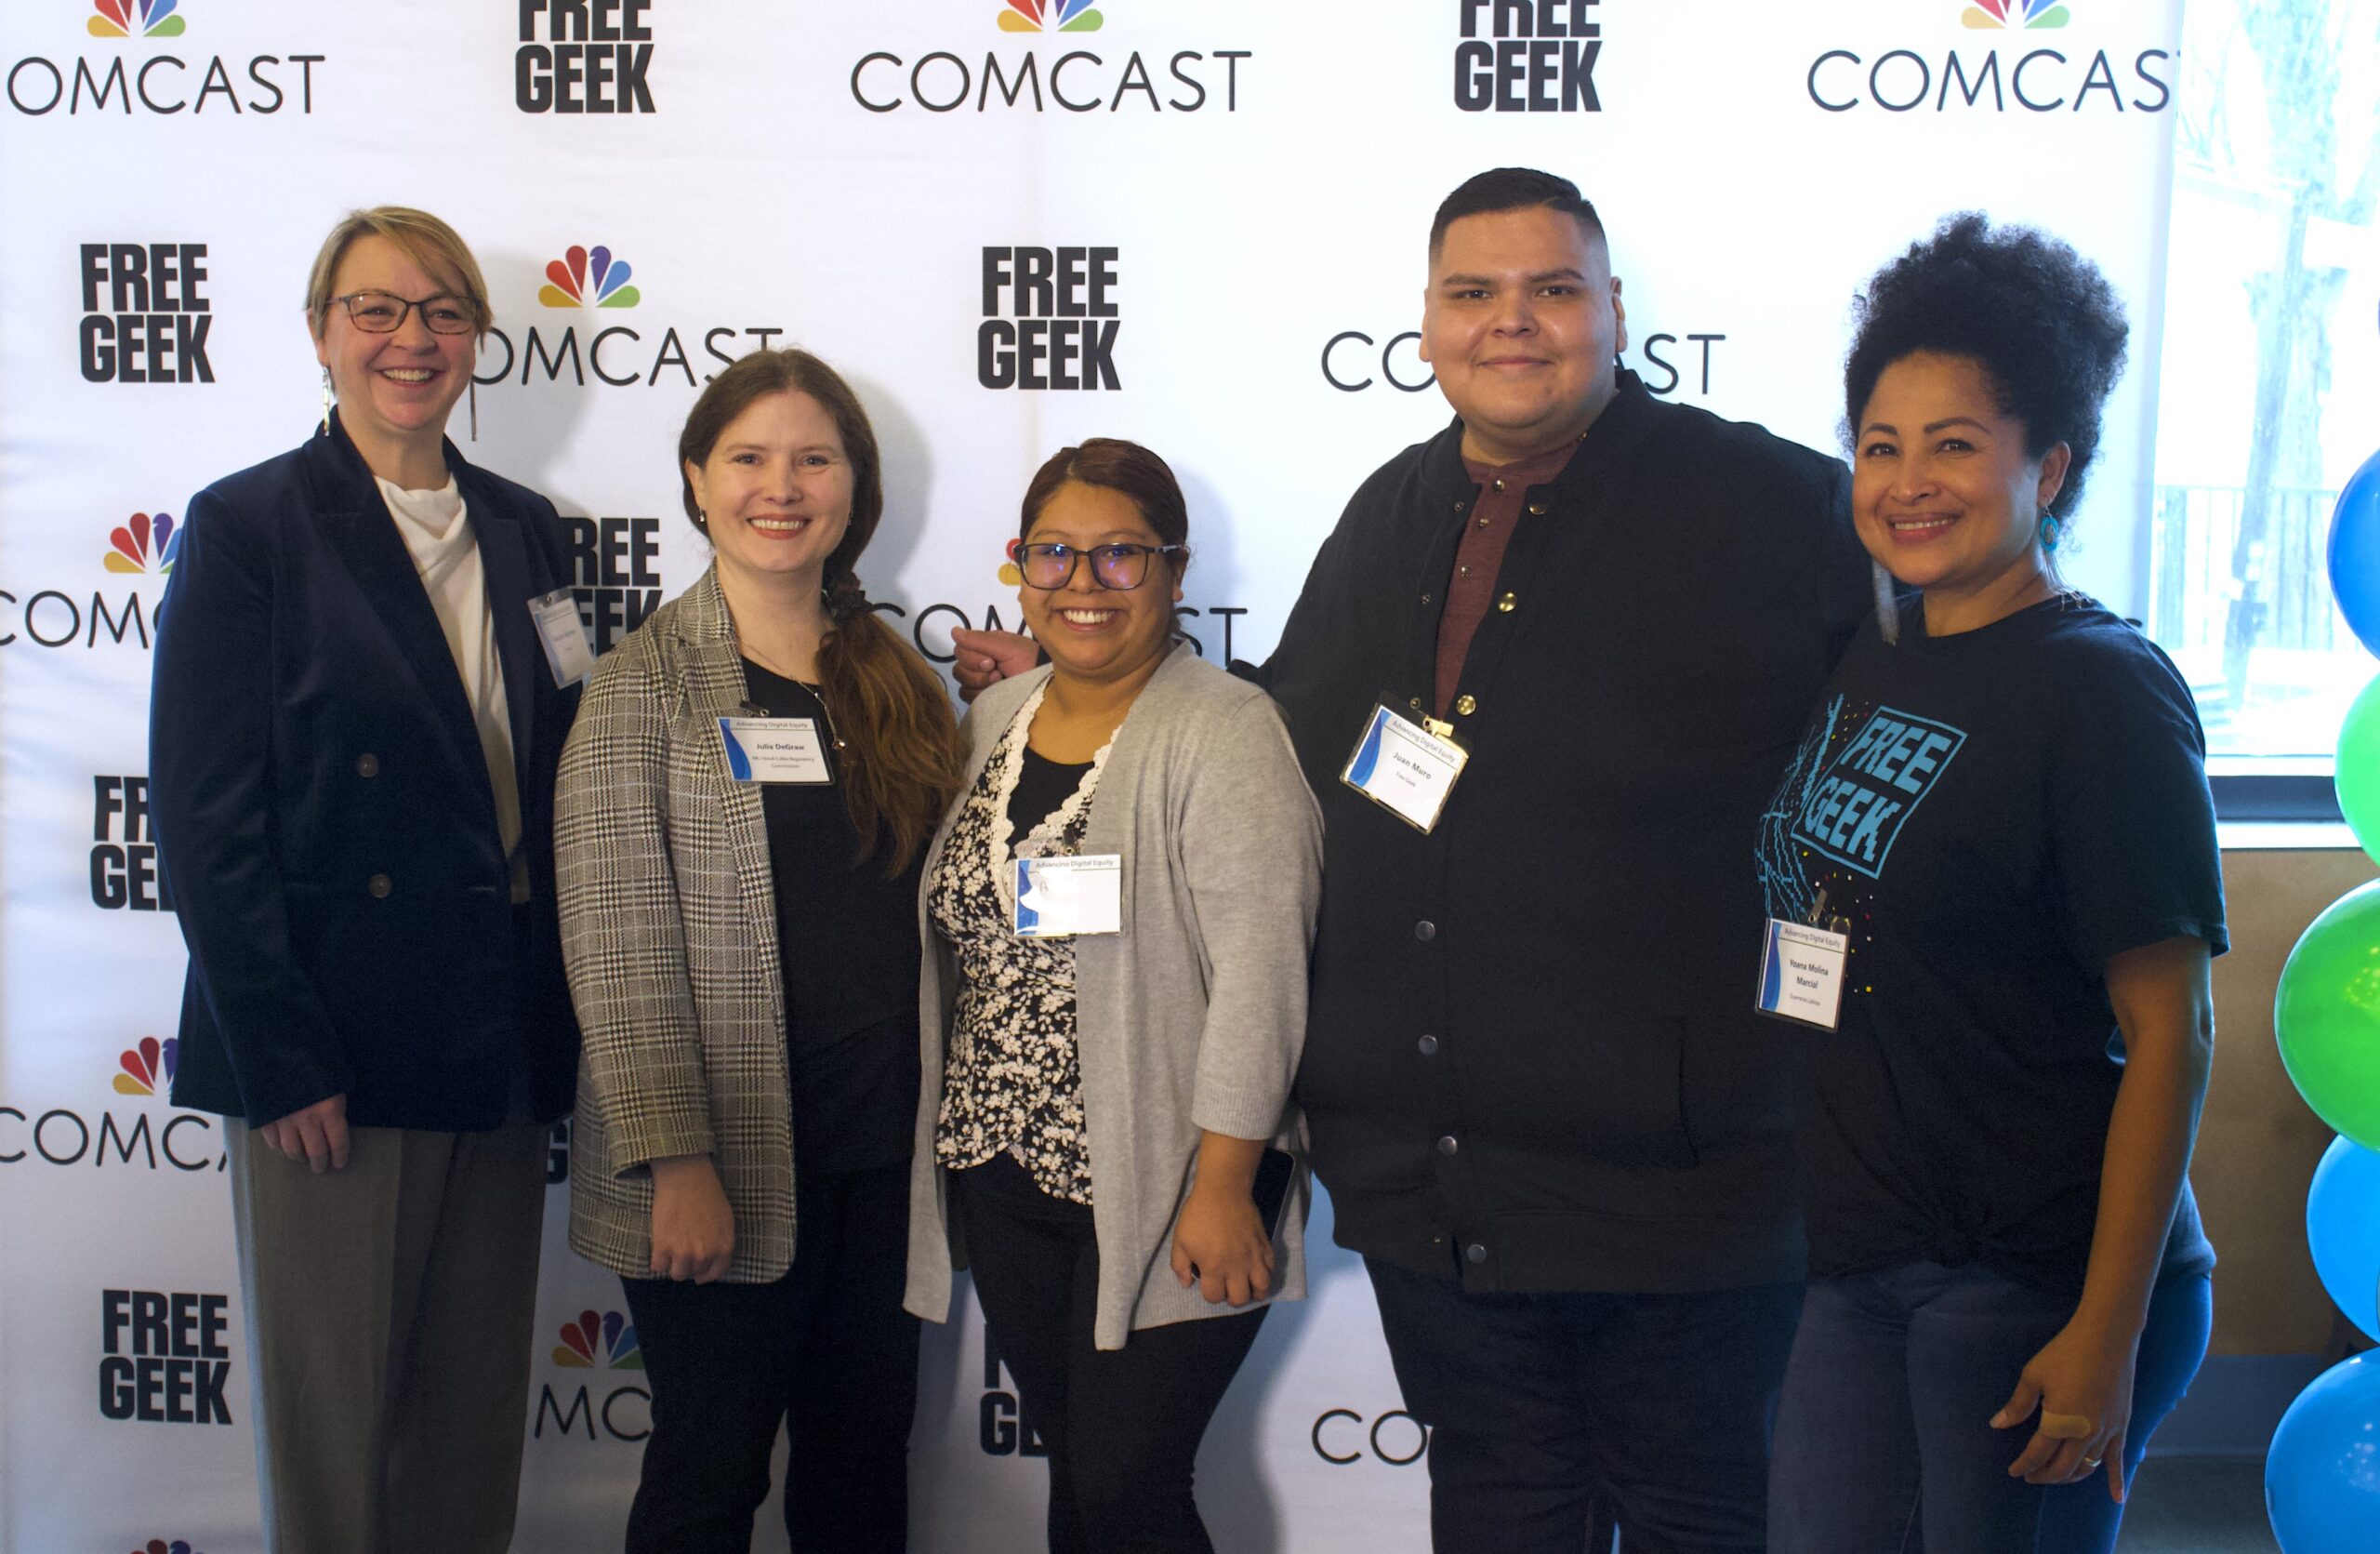 Comcast and Mt. Hood Cable Regulatory Commission Invest $2 Million in Free Geek to Bridge the Digital Divide